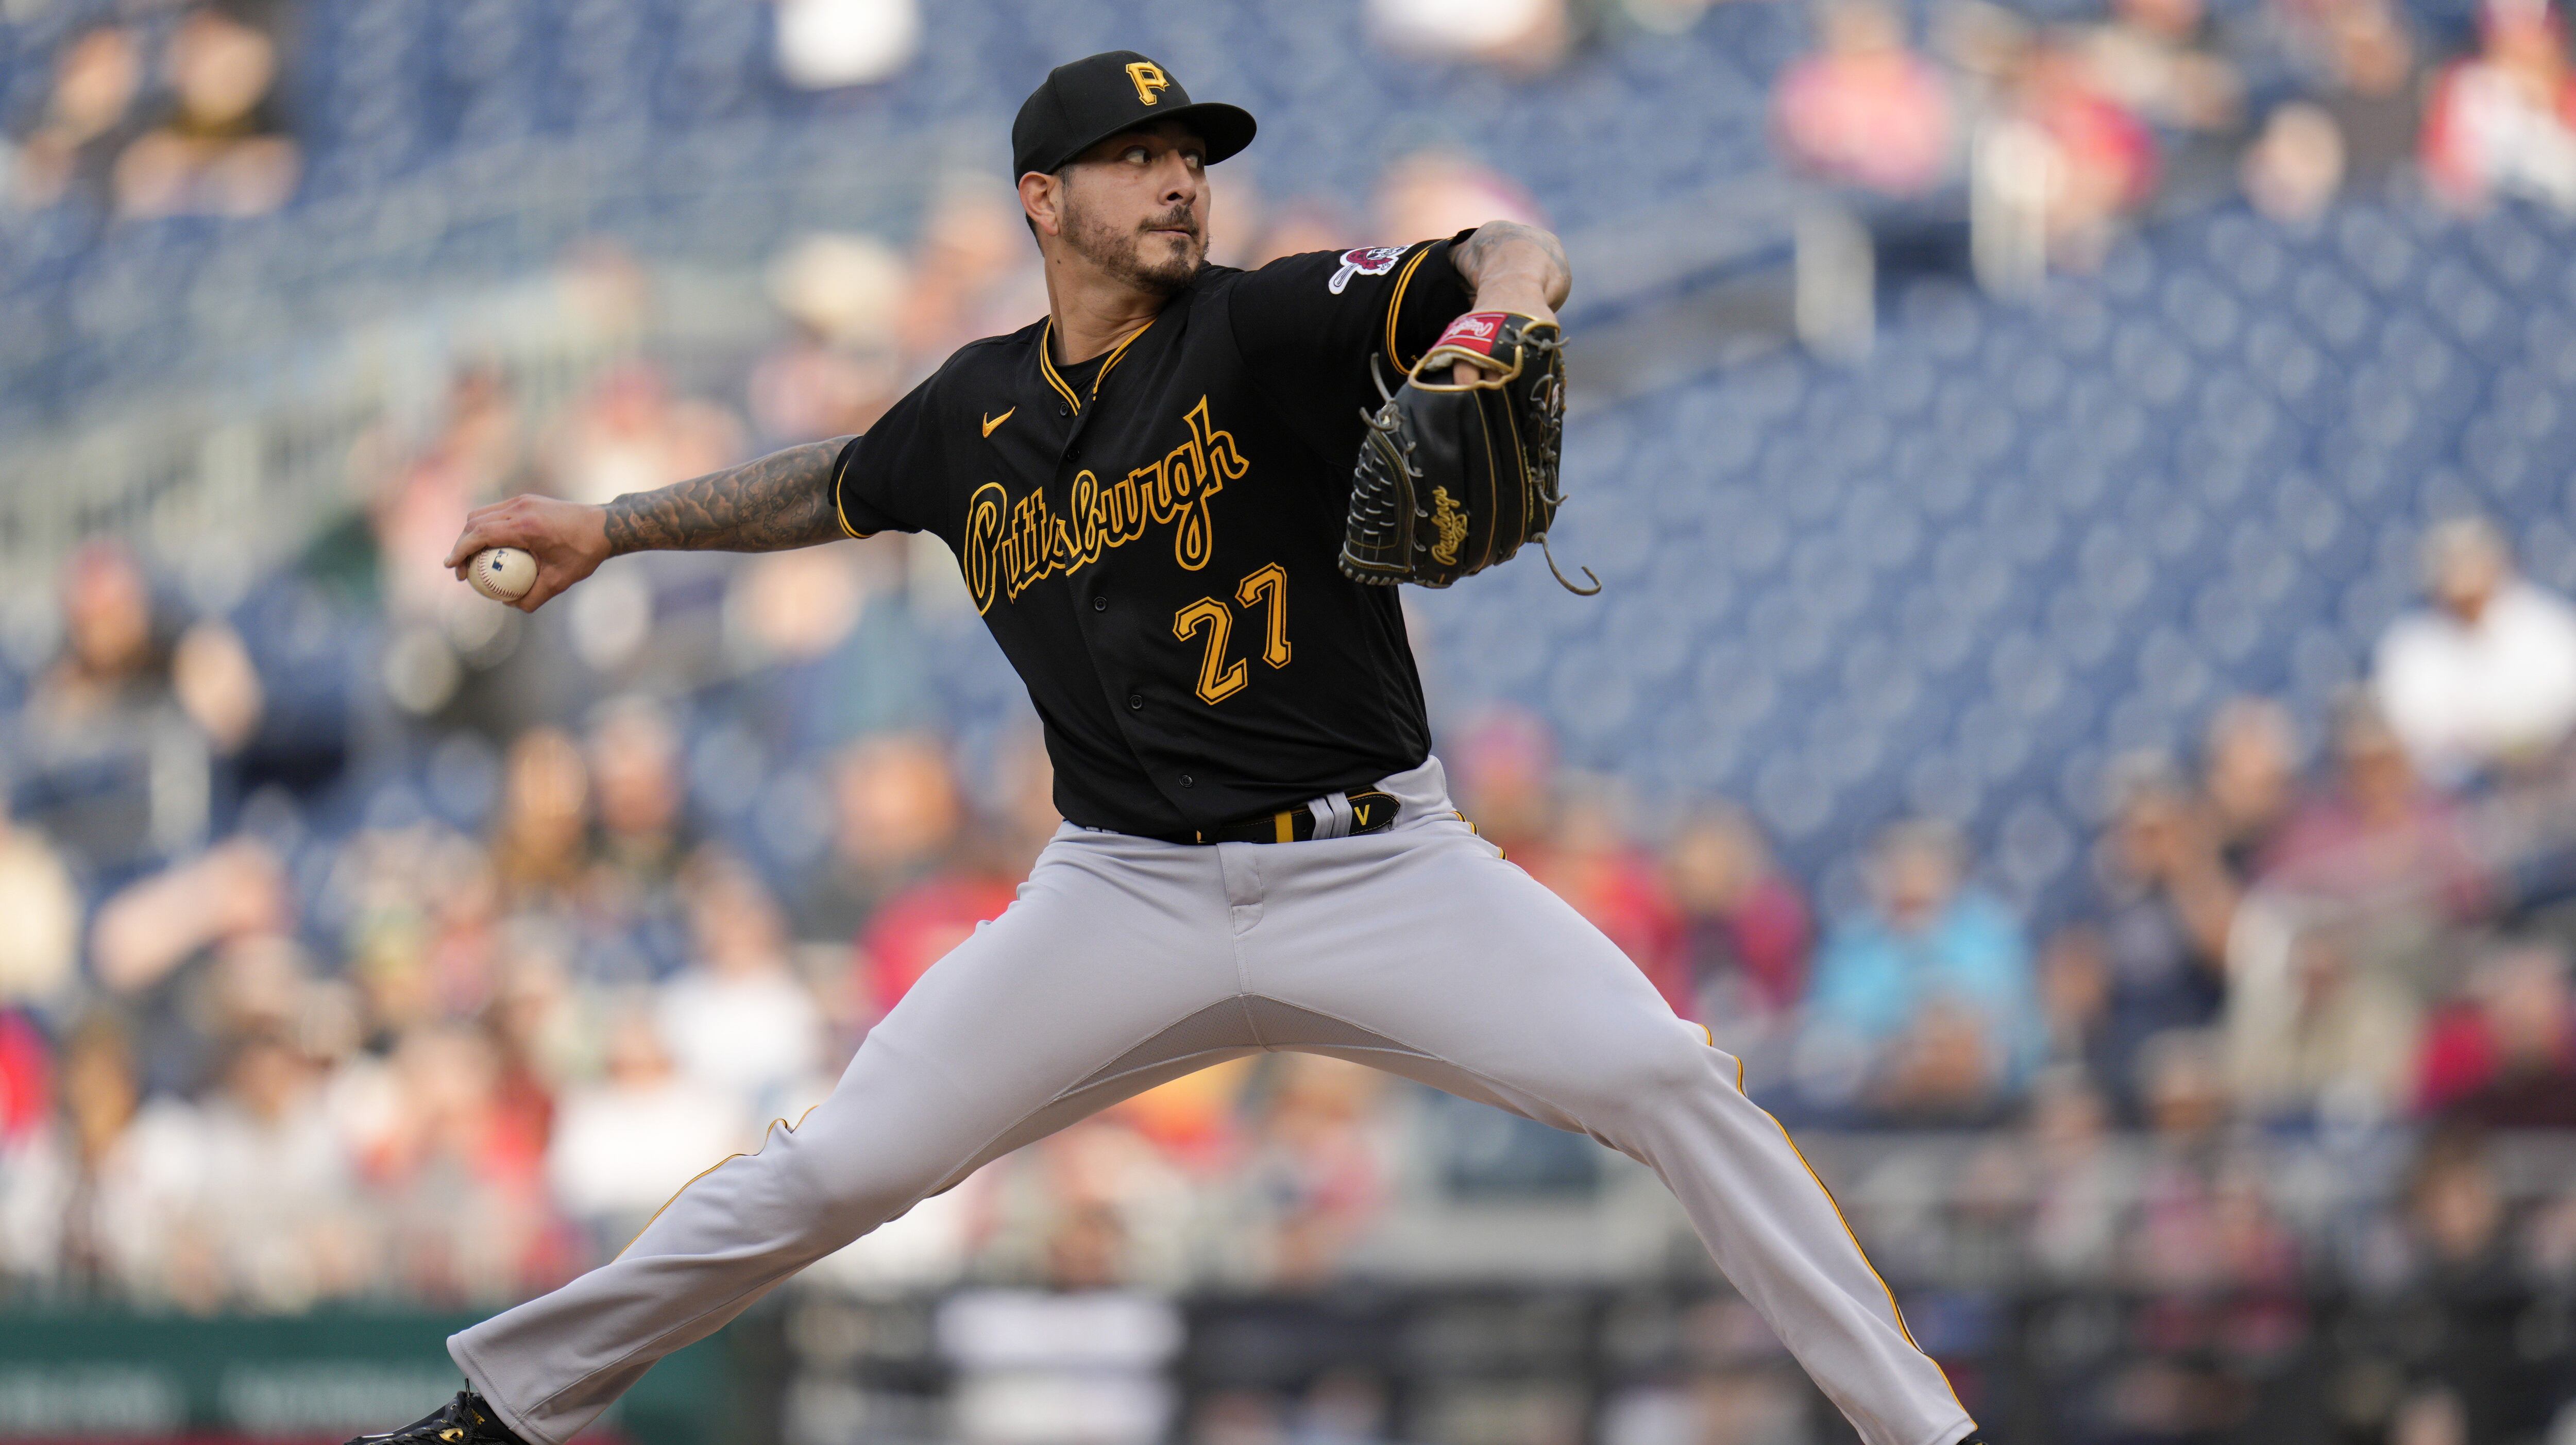 Pirates Preview: Bucs Face Former Pitcher in Sweep Opportunity